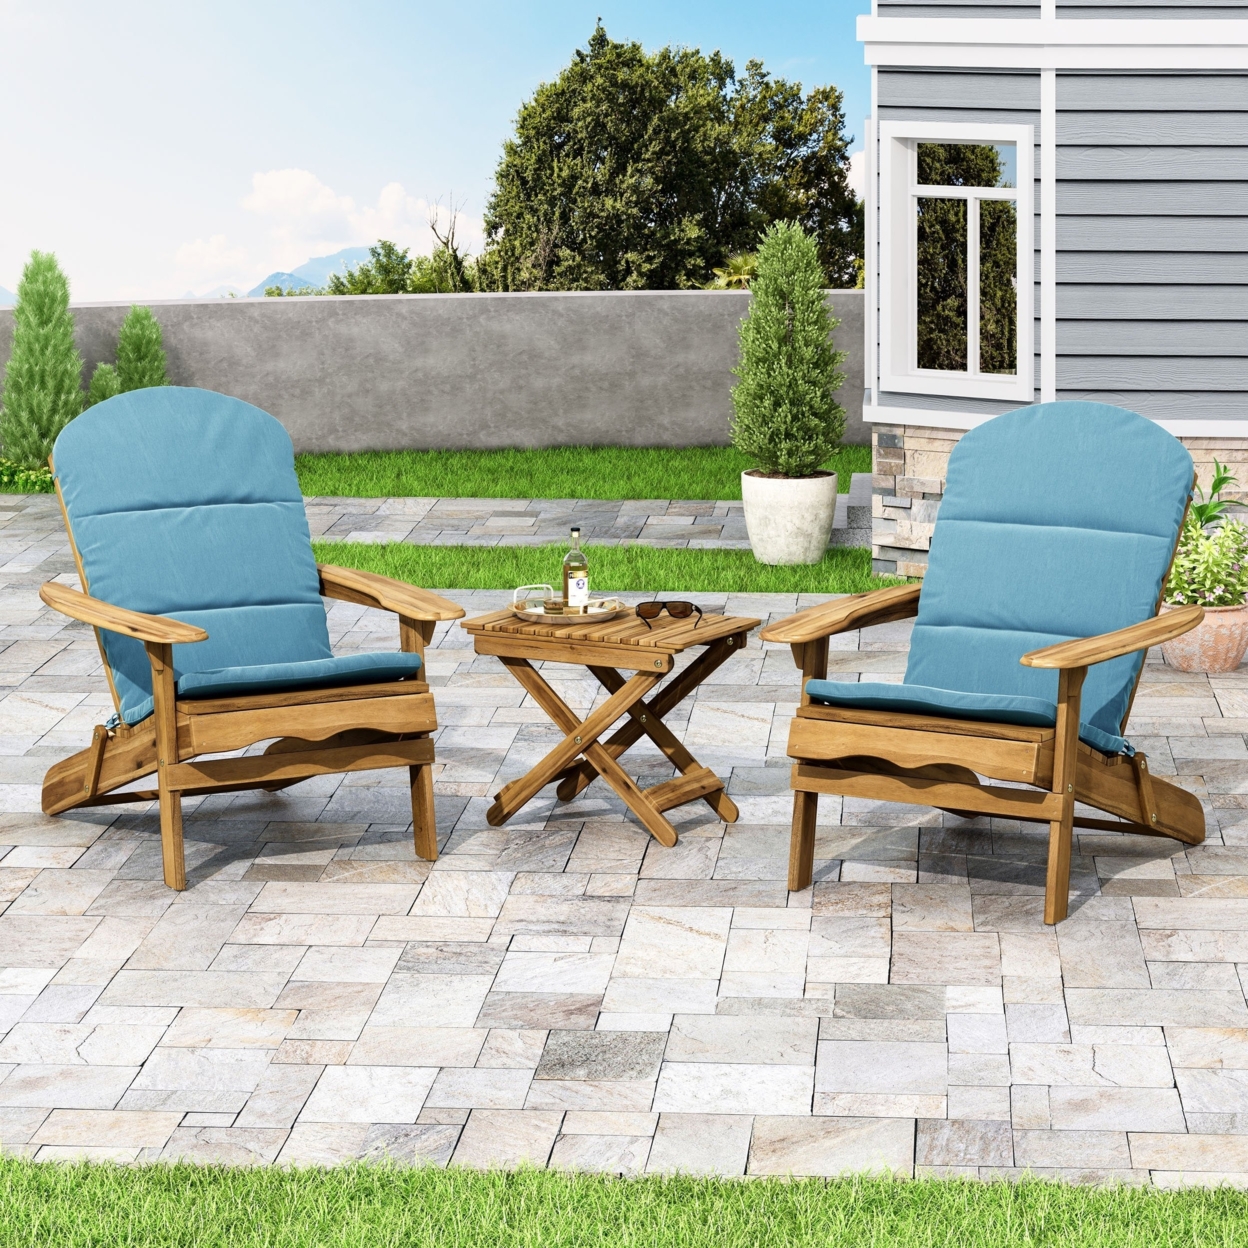 Reed Outdoor 2 Seater Acacia Wood Chat Set With Water Resistant Cushions - Natural/dark Teal